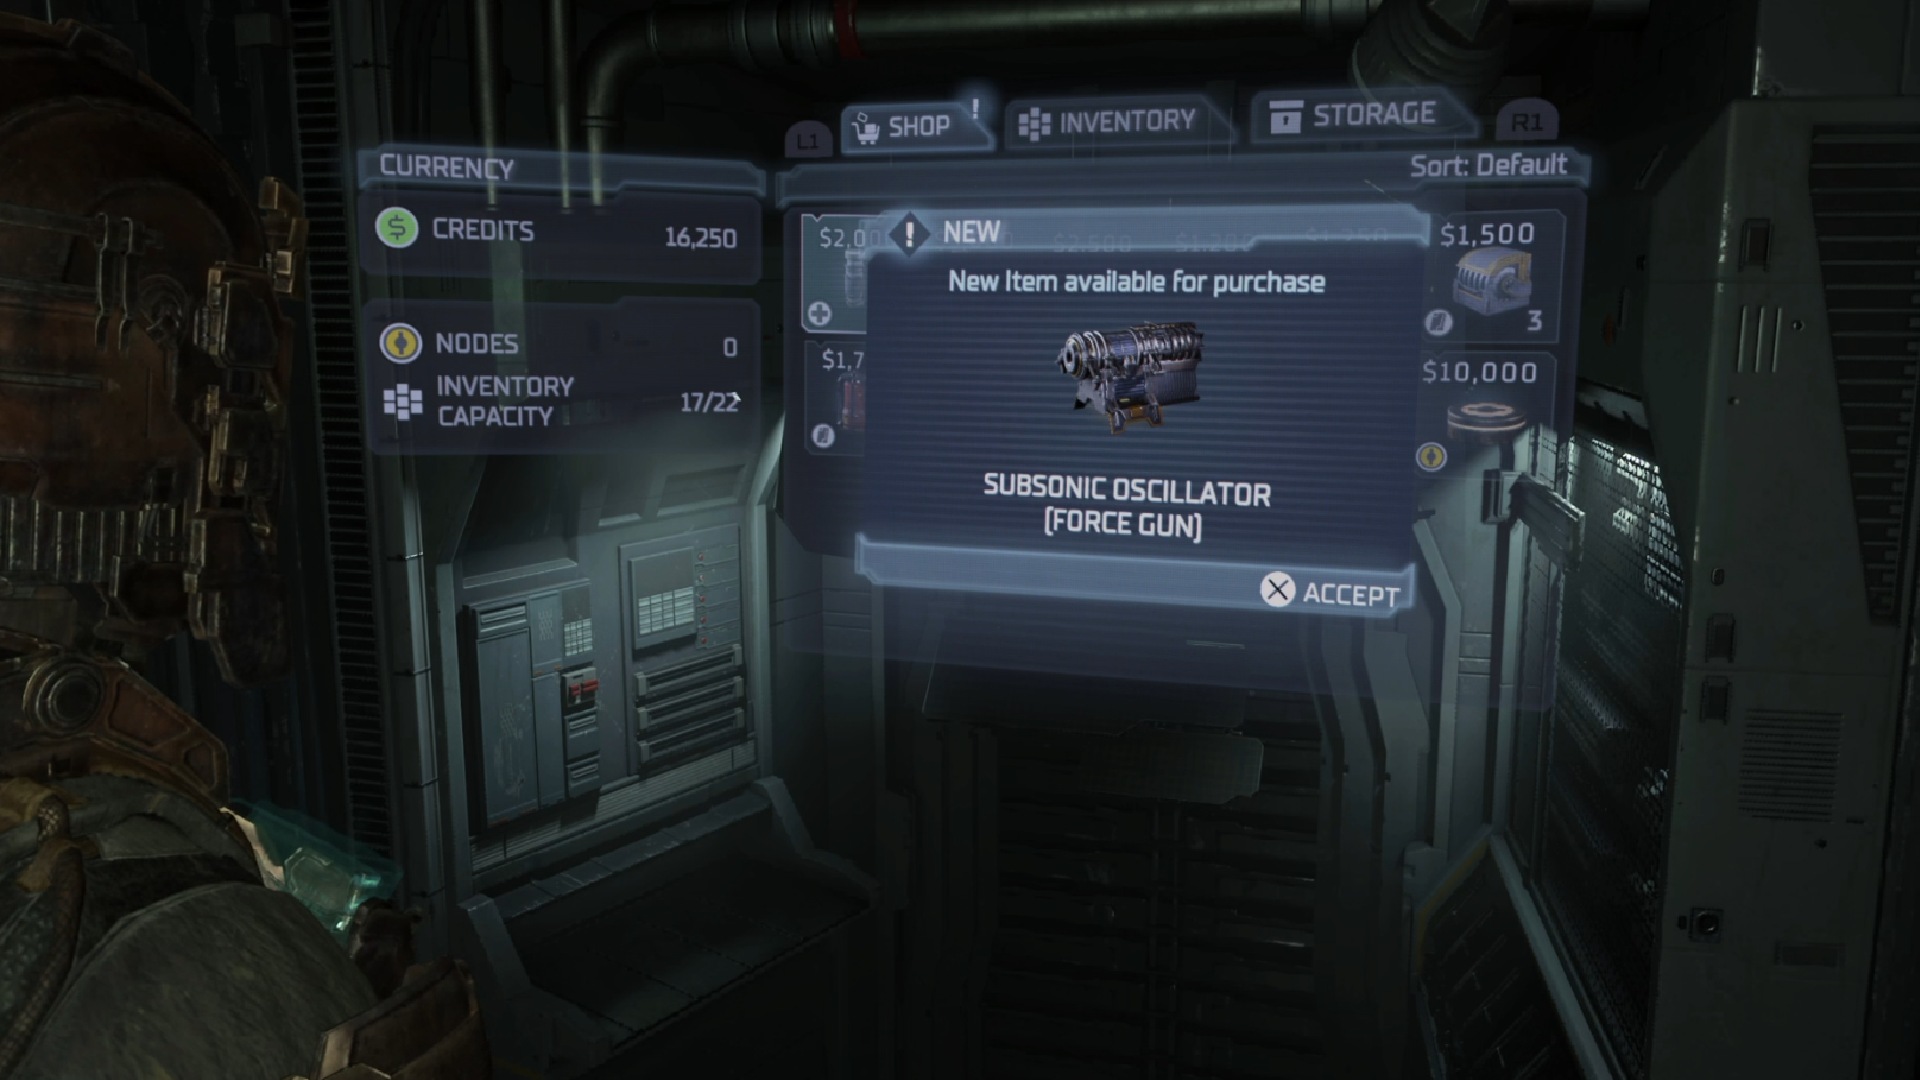 Dead Space Weapon Upgrades: The weapon upgrade can be seen